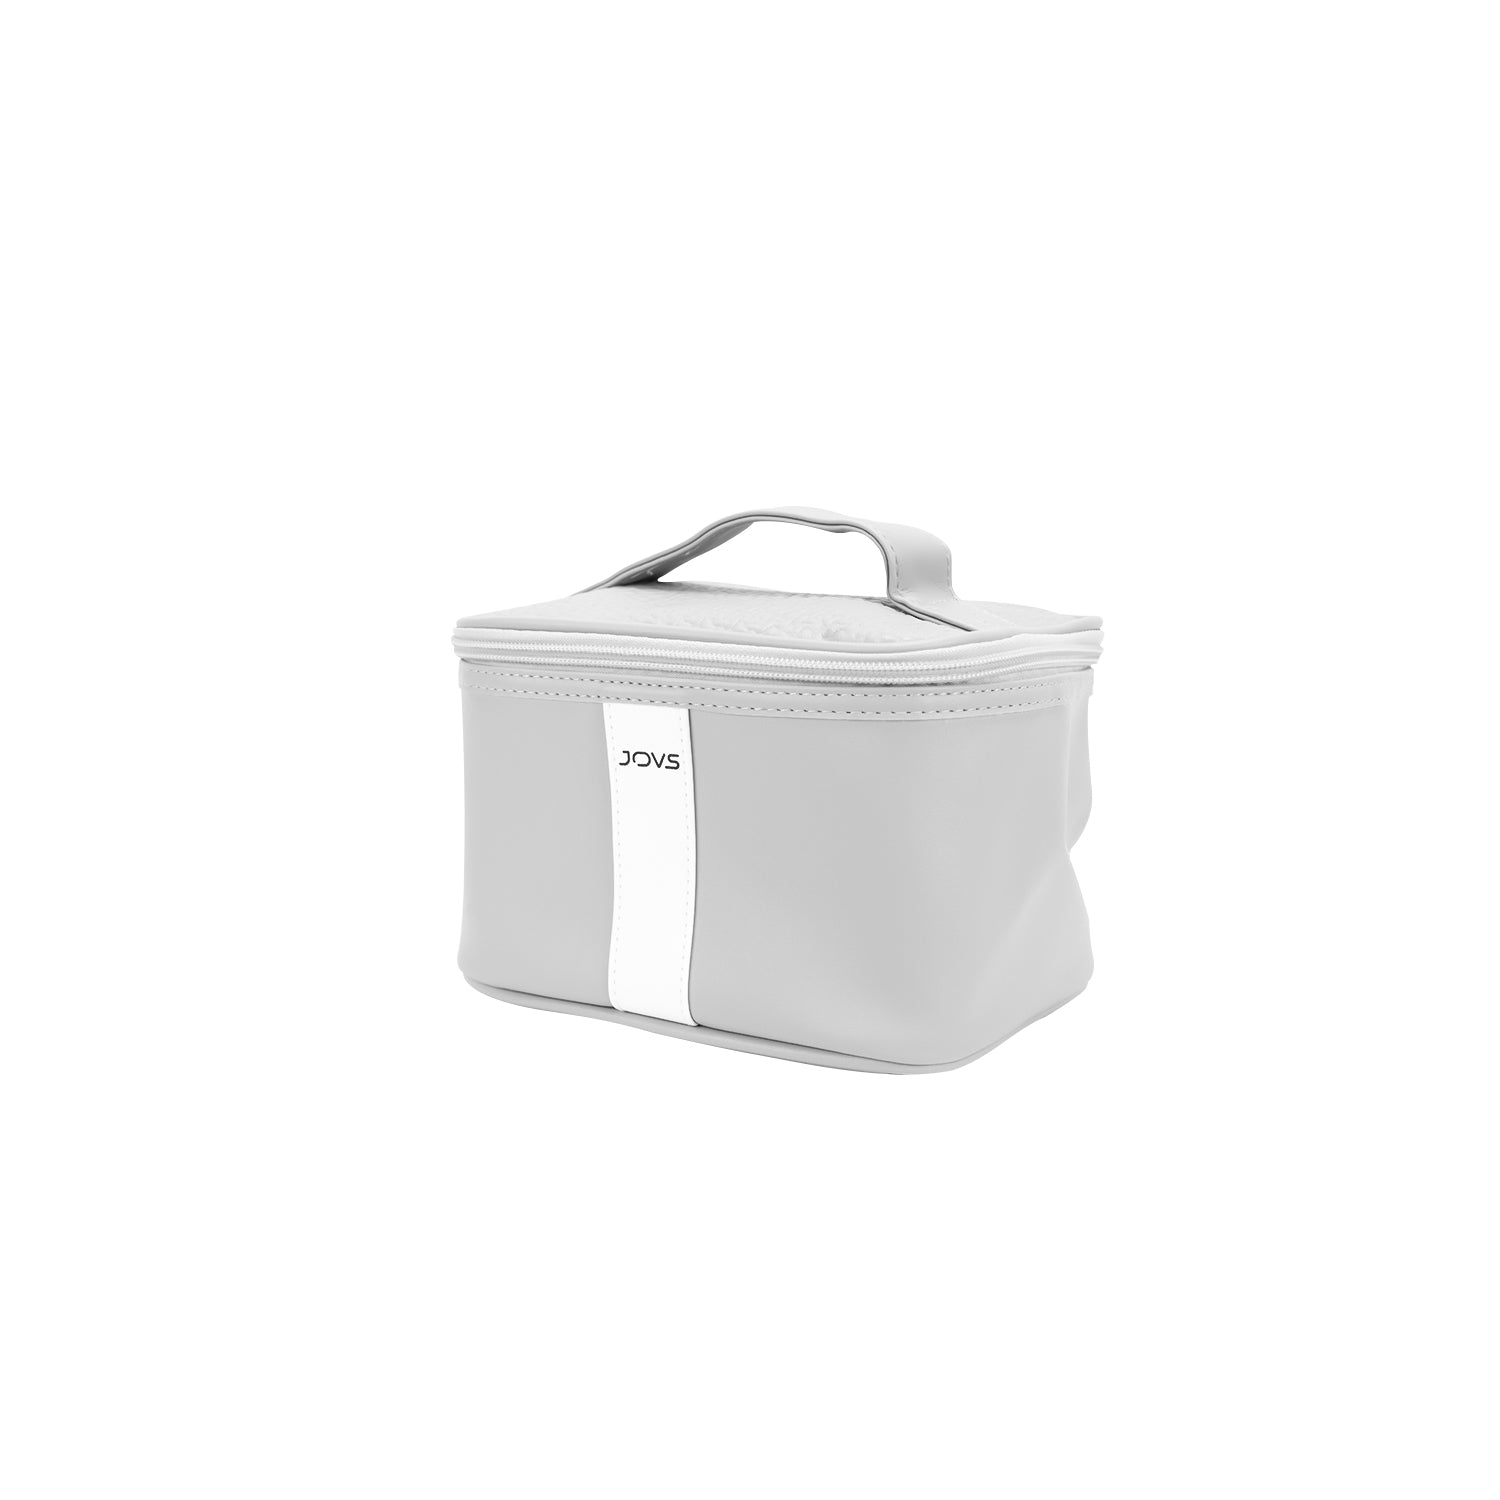 JOVS White Cosmetic Bag with Zipper and Logo Detailing for Beauty Essentials Storage.